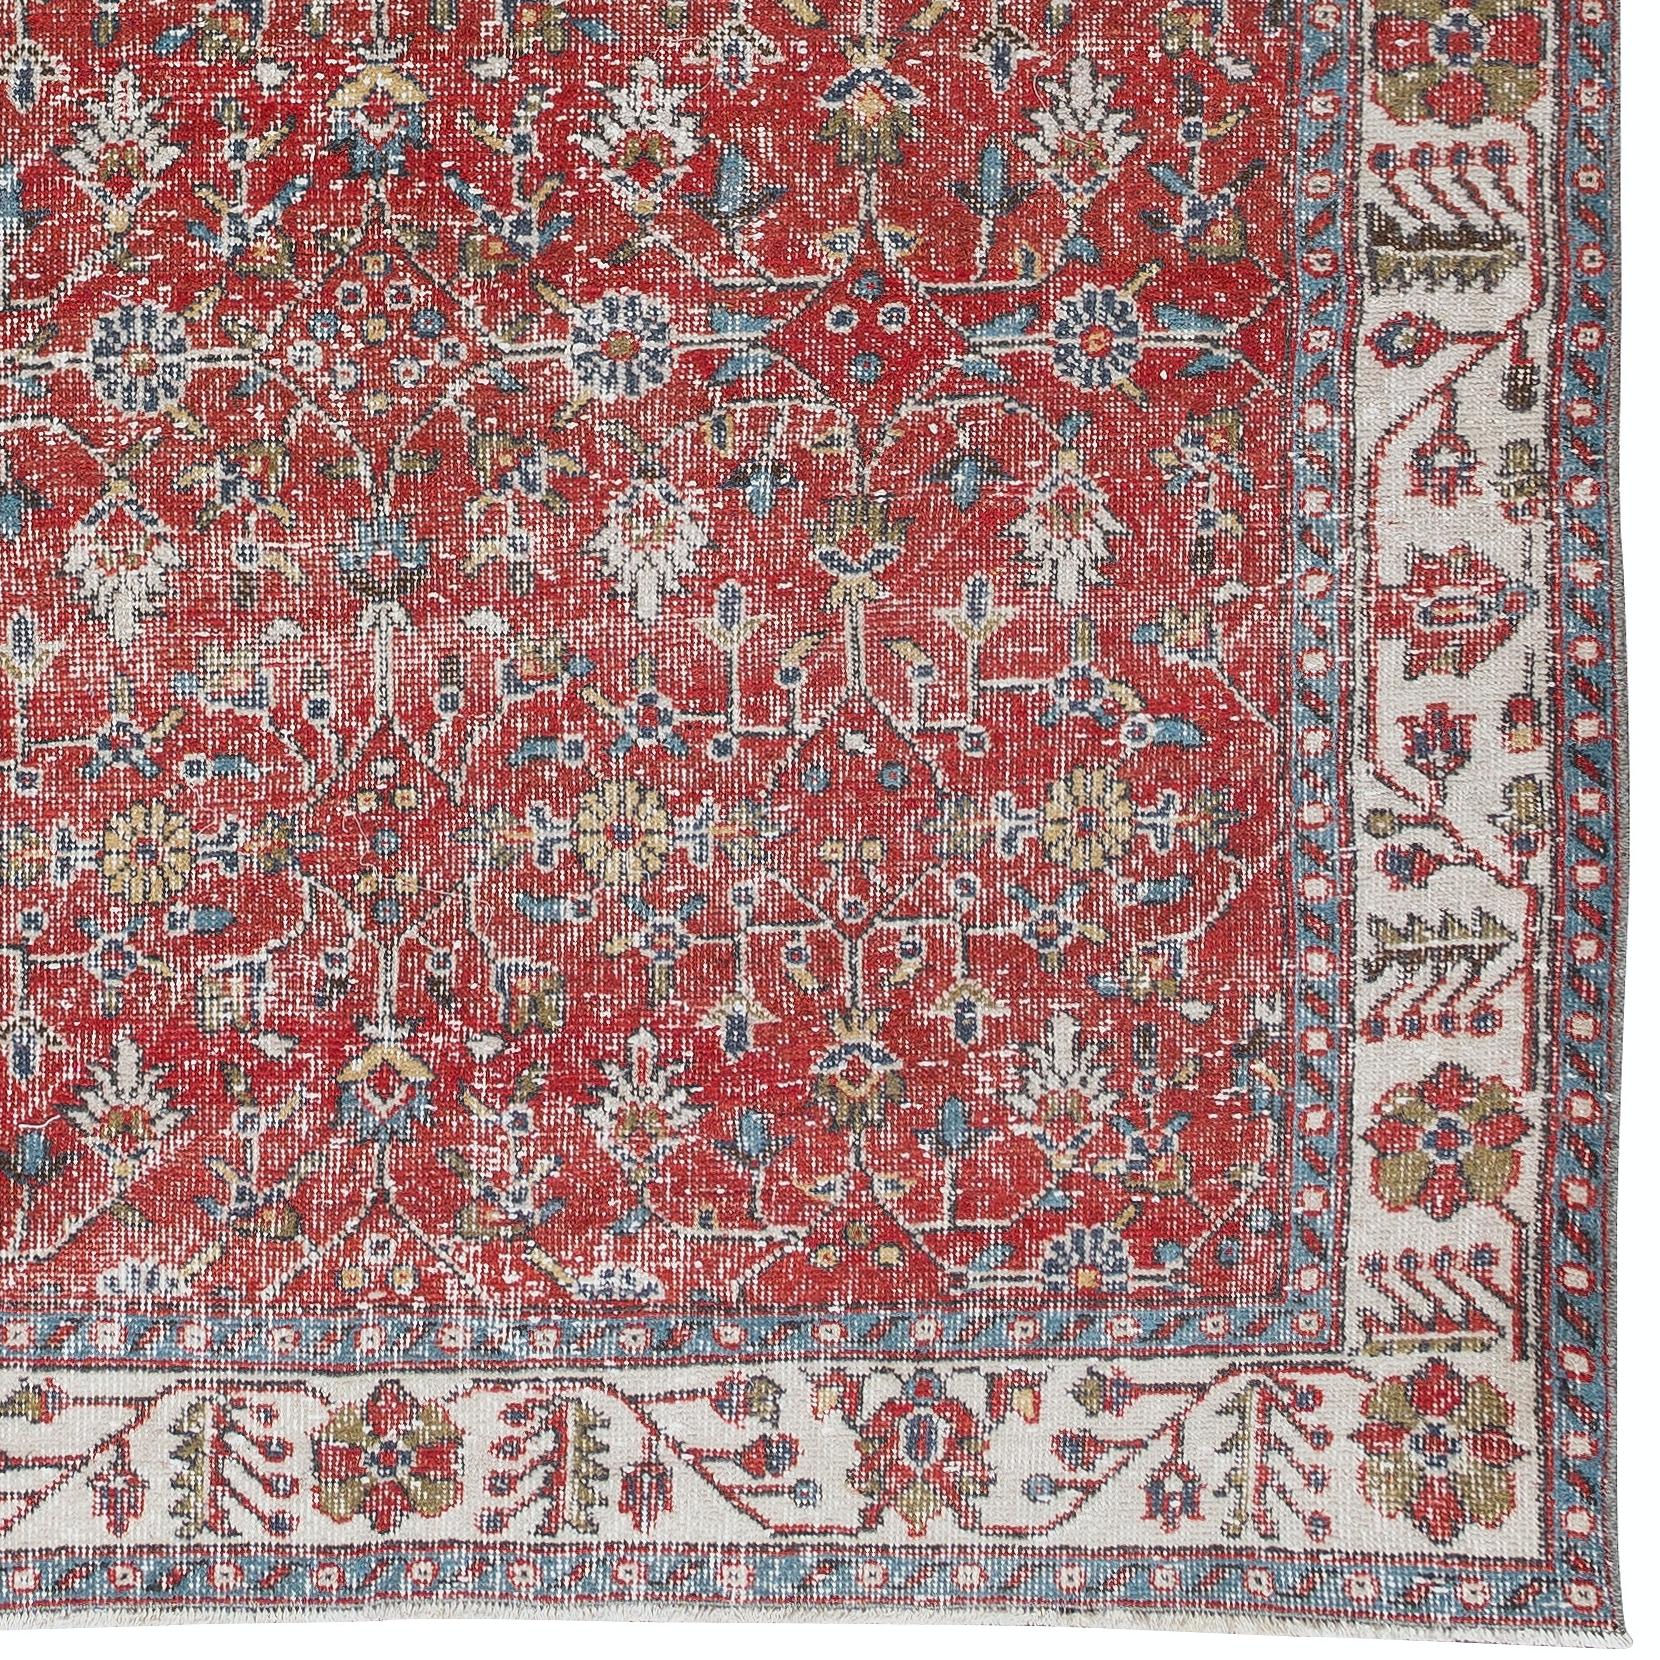 5.7x9.7 Ft Vintage Floral Hand Knotted Anatolian Wool Area Rug in Red & Beige In Good Condition For Sale In Philadelphia, PA